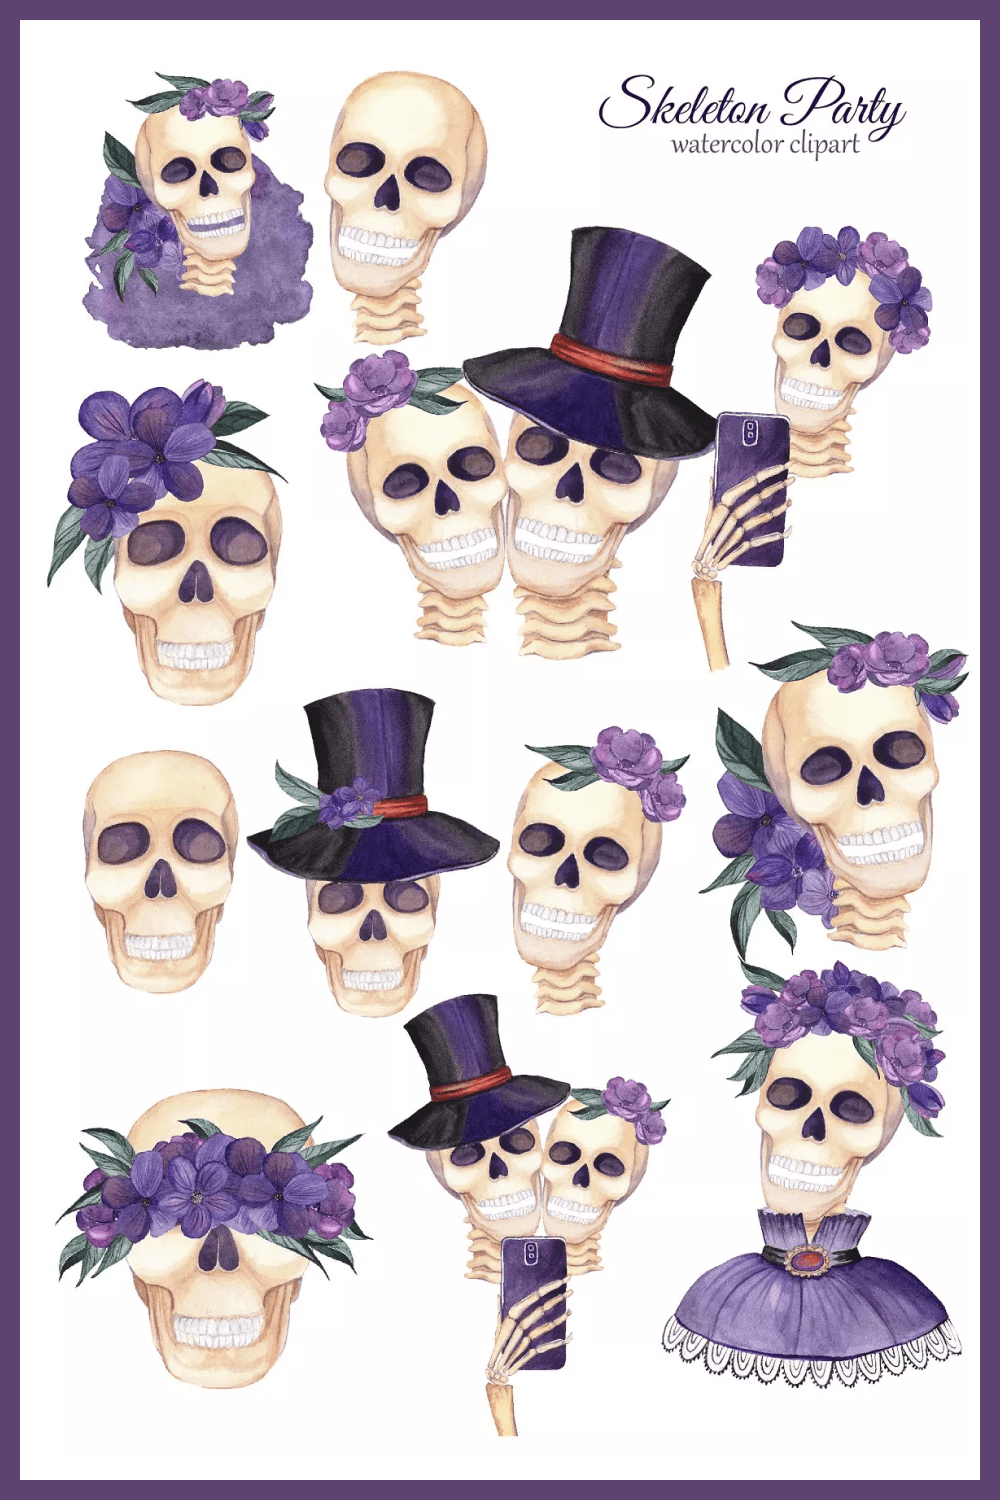 Painted skulls with smiles with flowers and a hat on their heads.